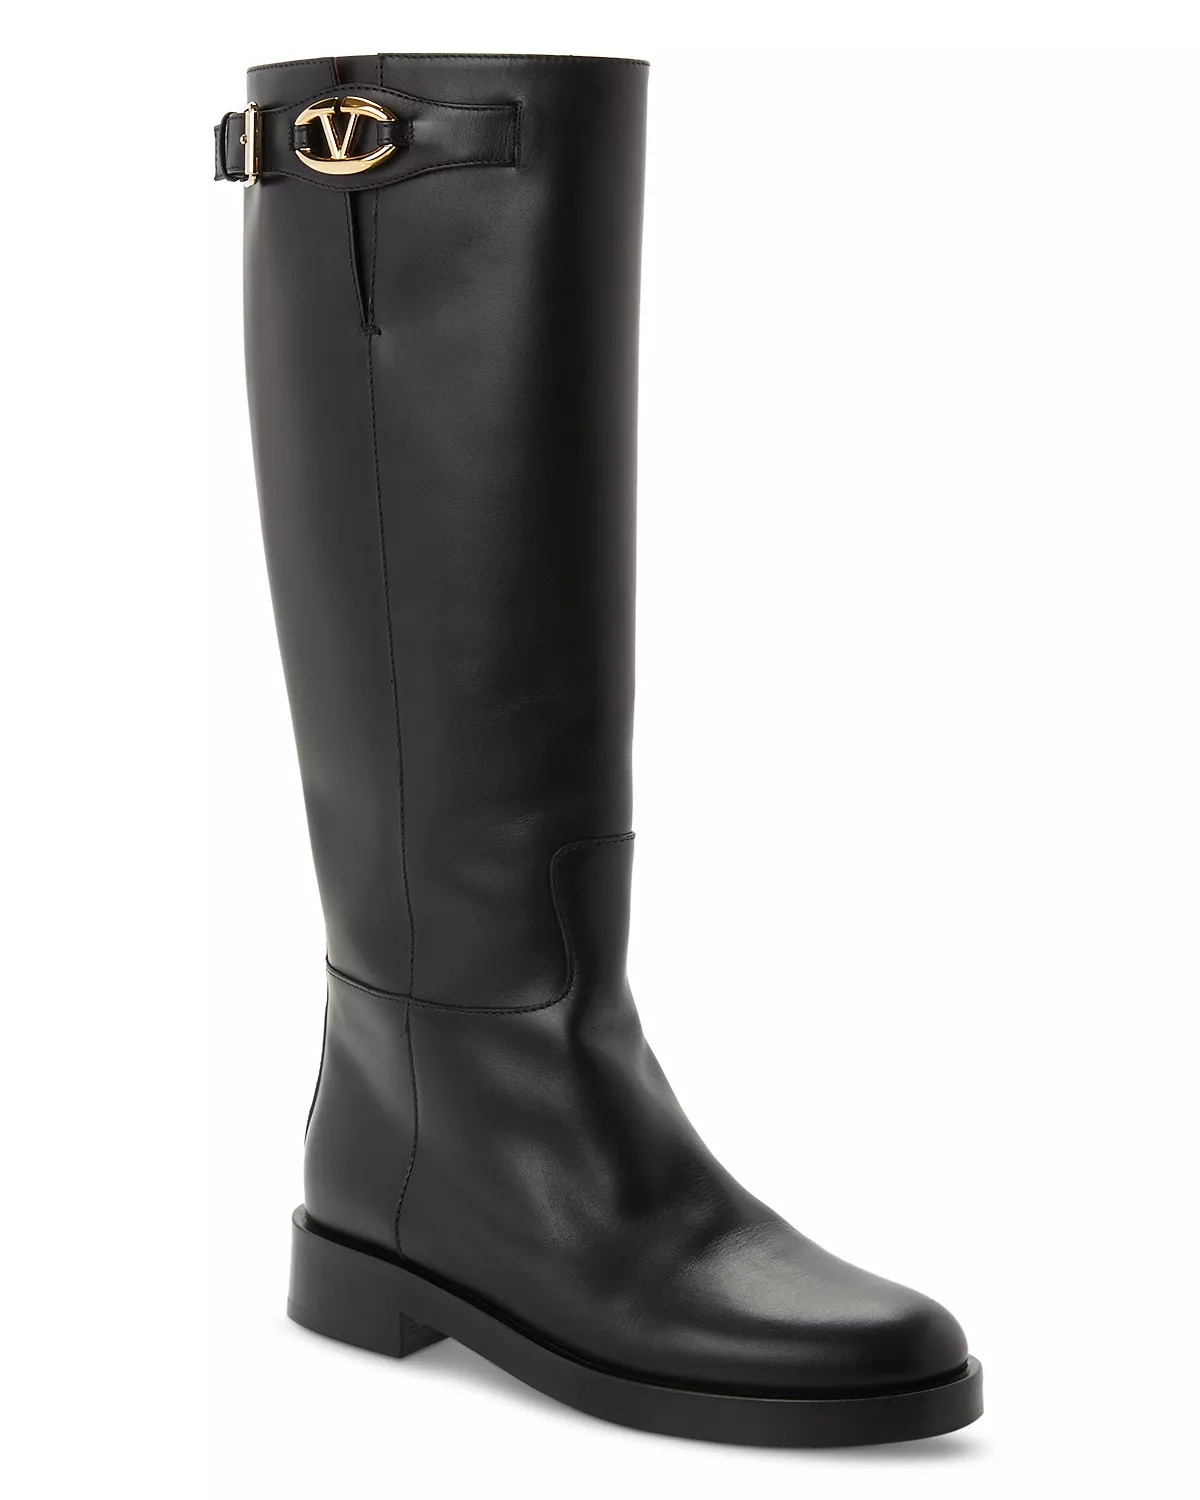 Women's Buckled Riding Boots - 1